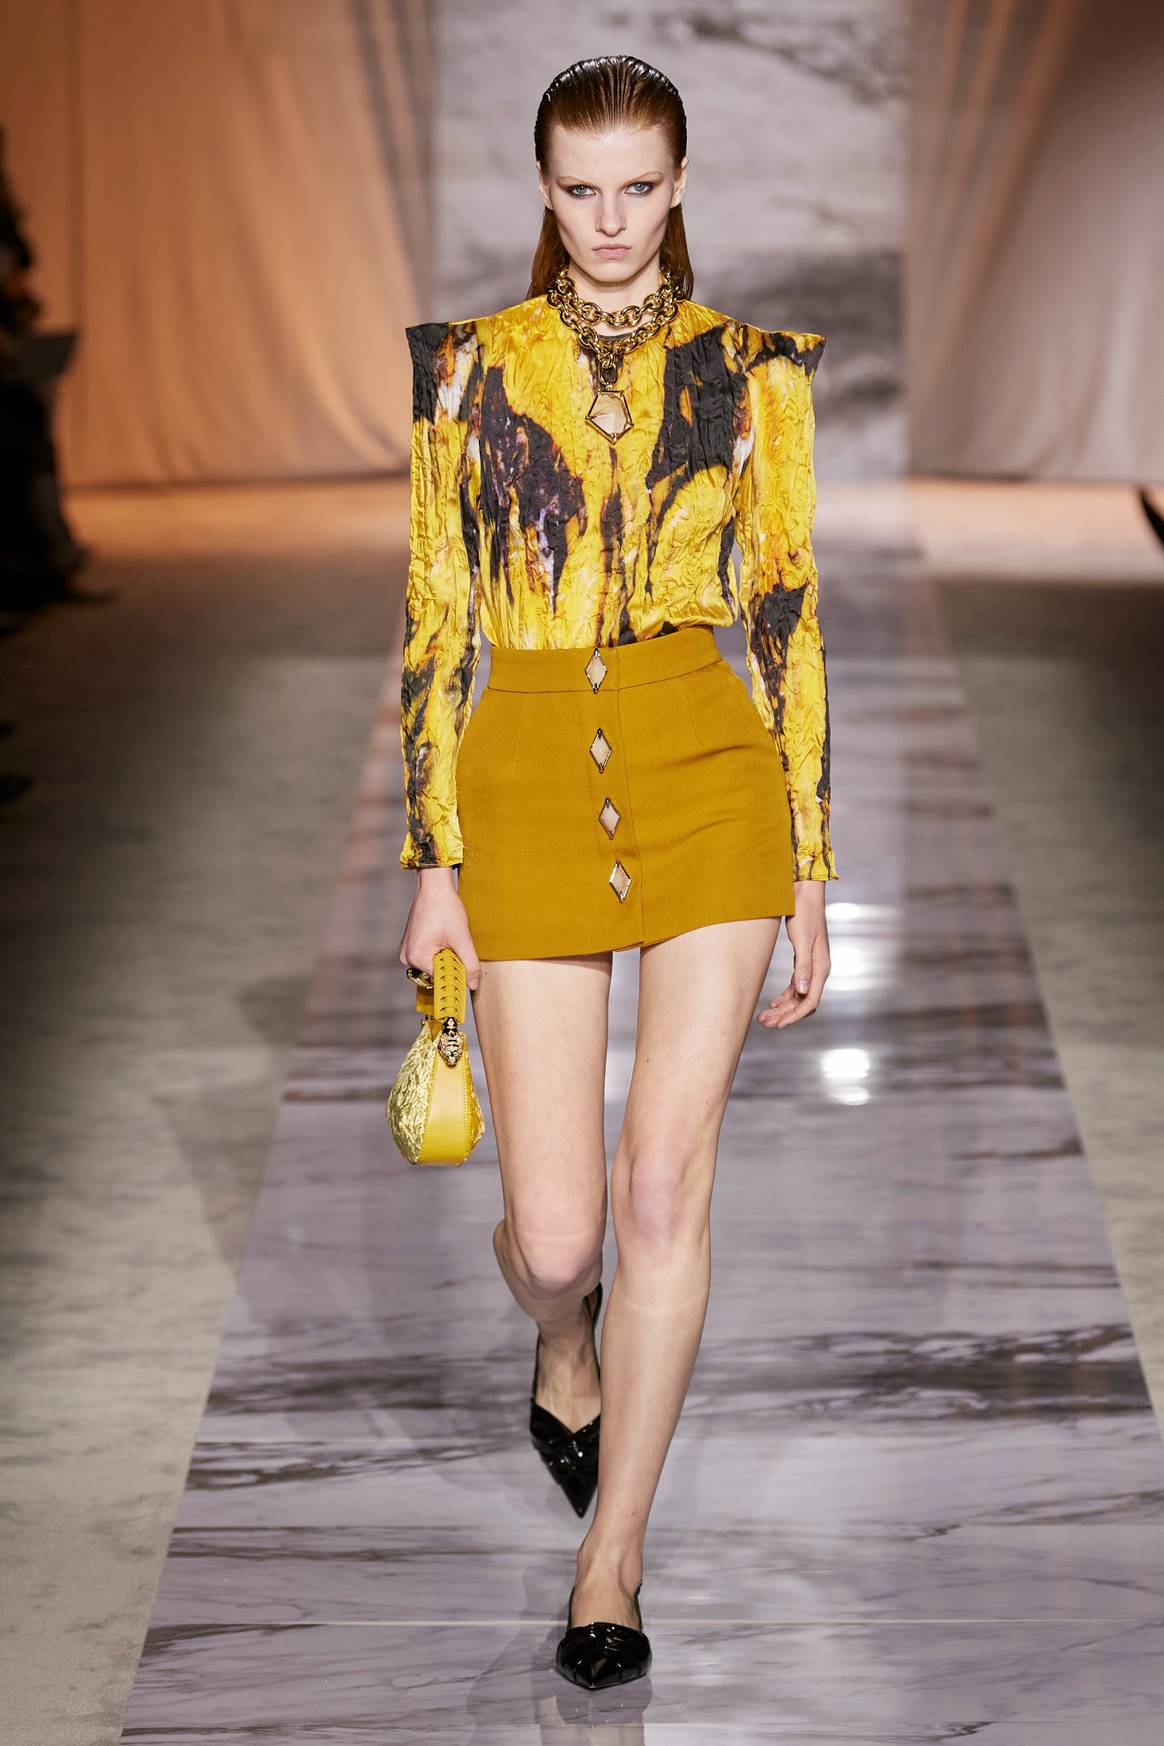 Roberto Cavalli FW24 collection presented at MFW.